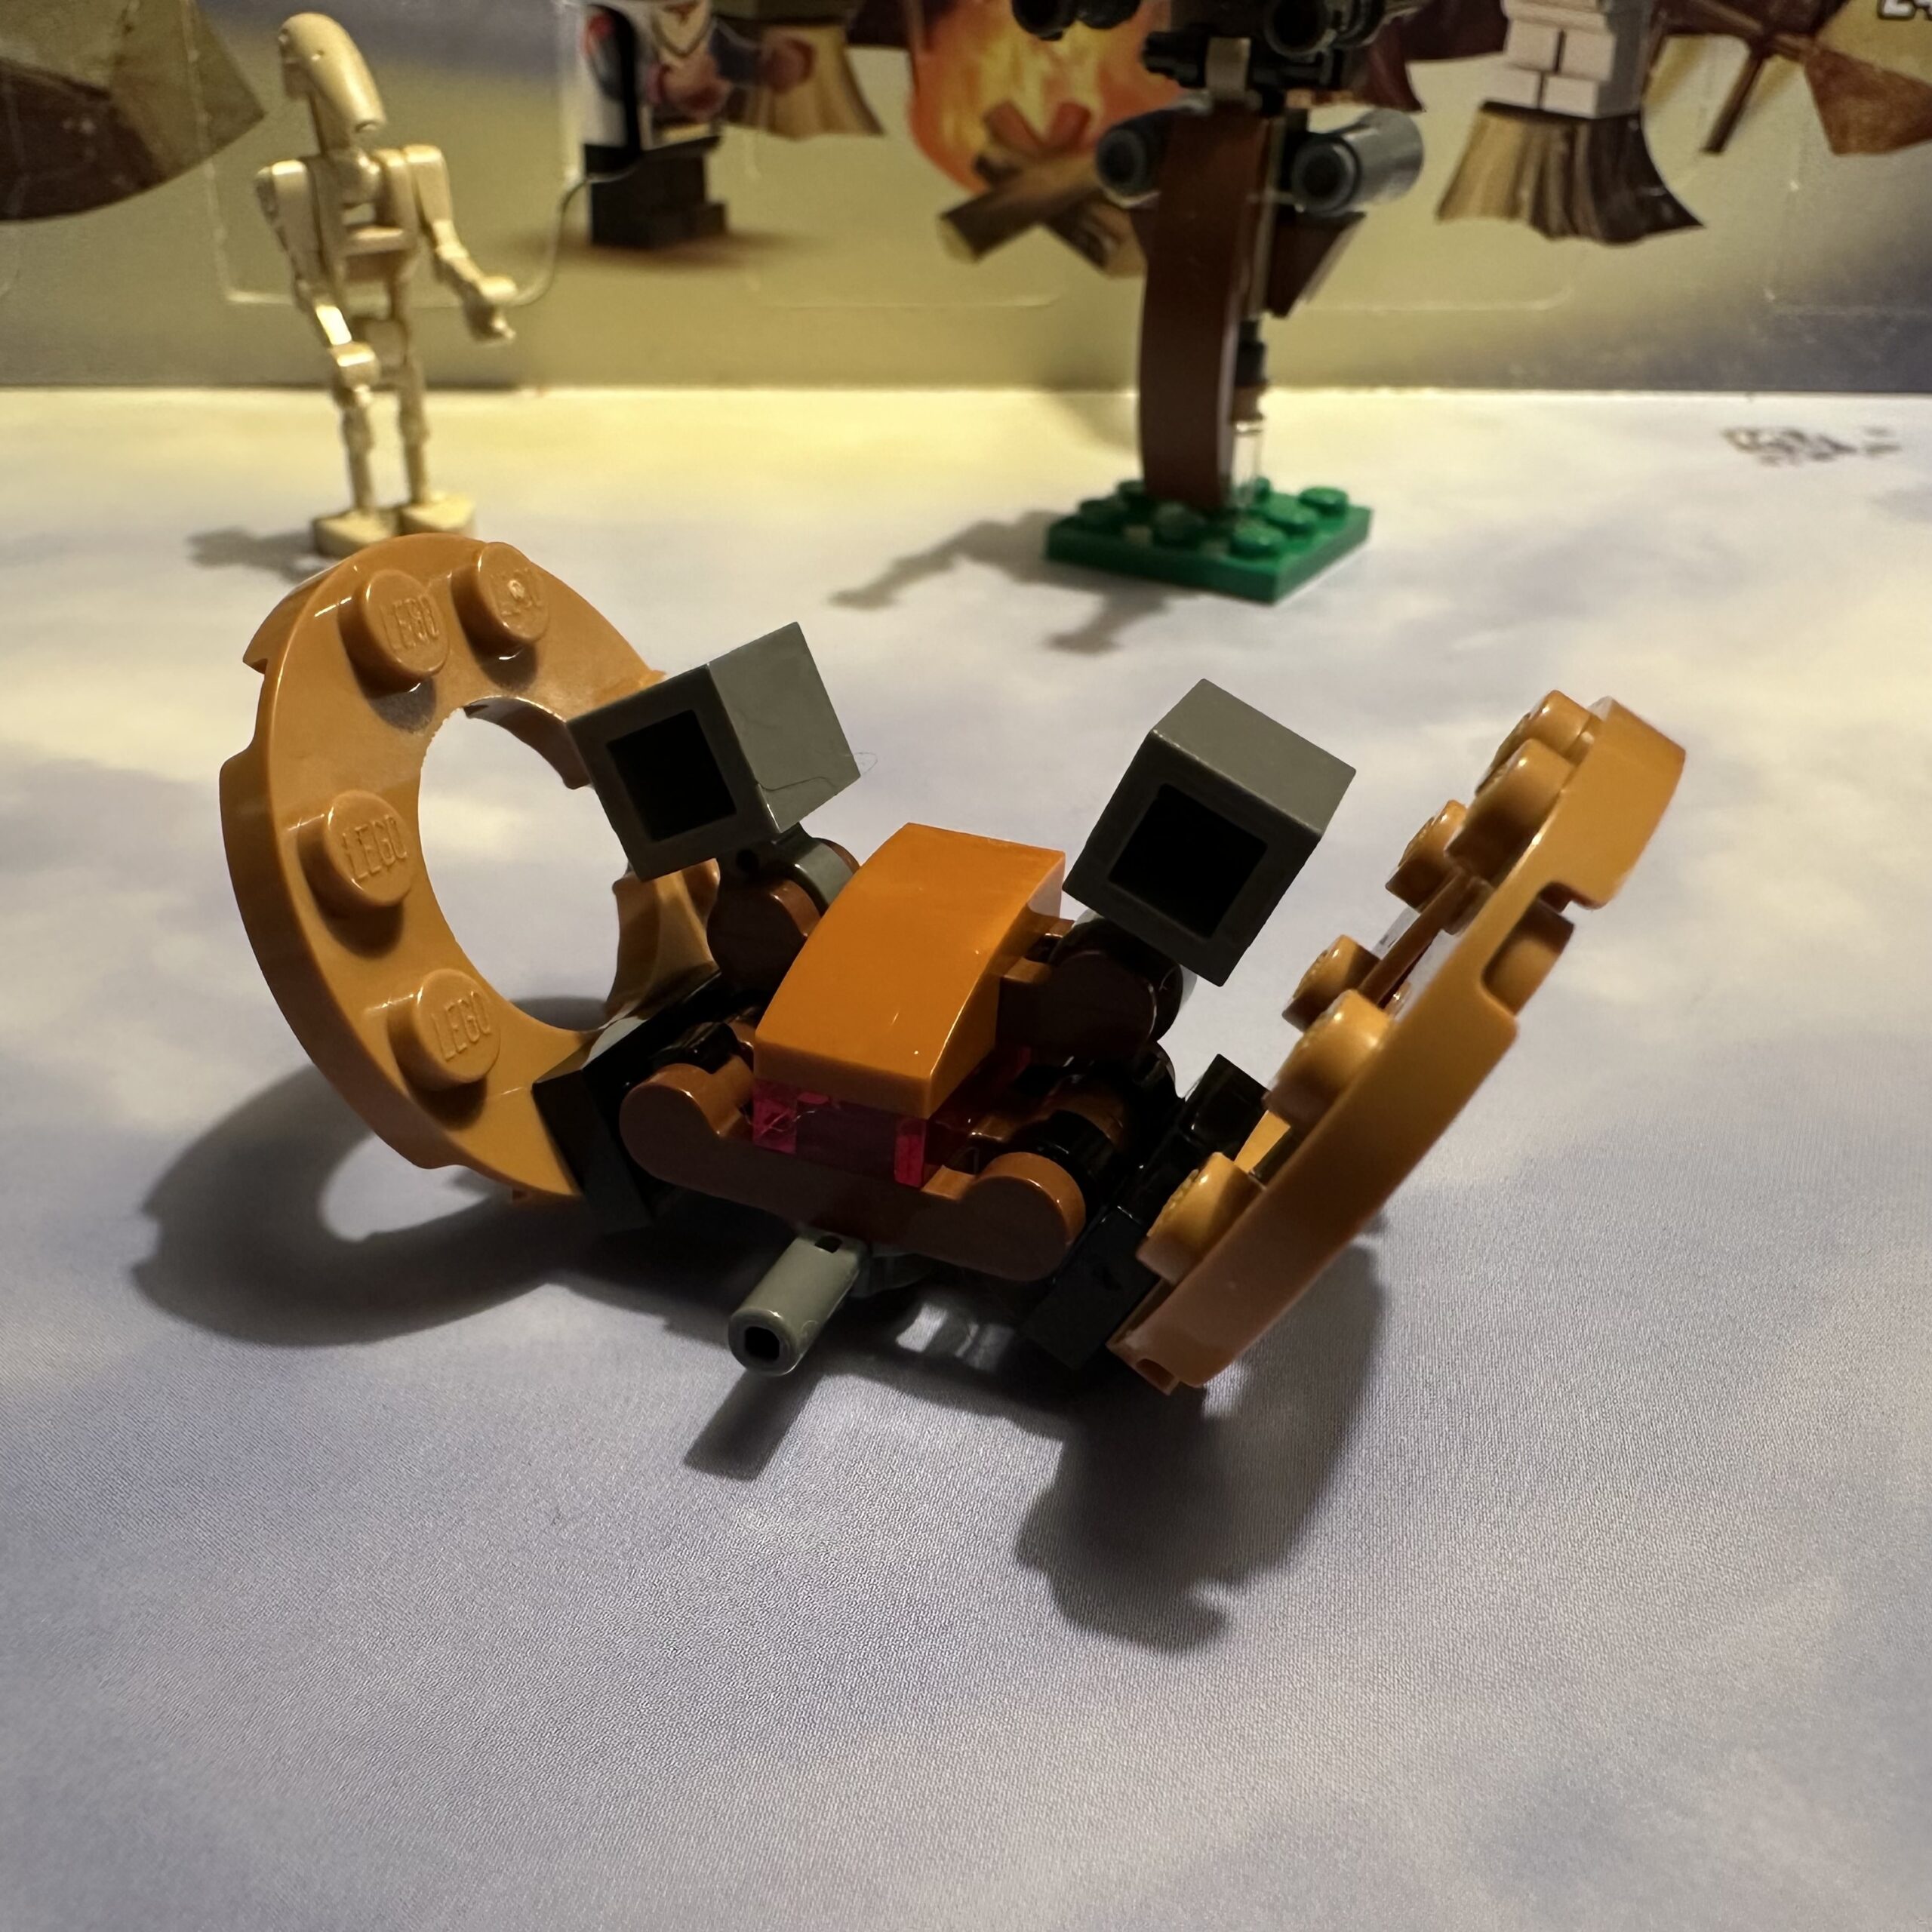 LEGO micro-build of a weird tank with two big brown wagon wheels mounted at an angle.